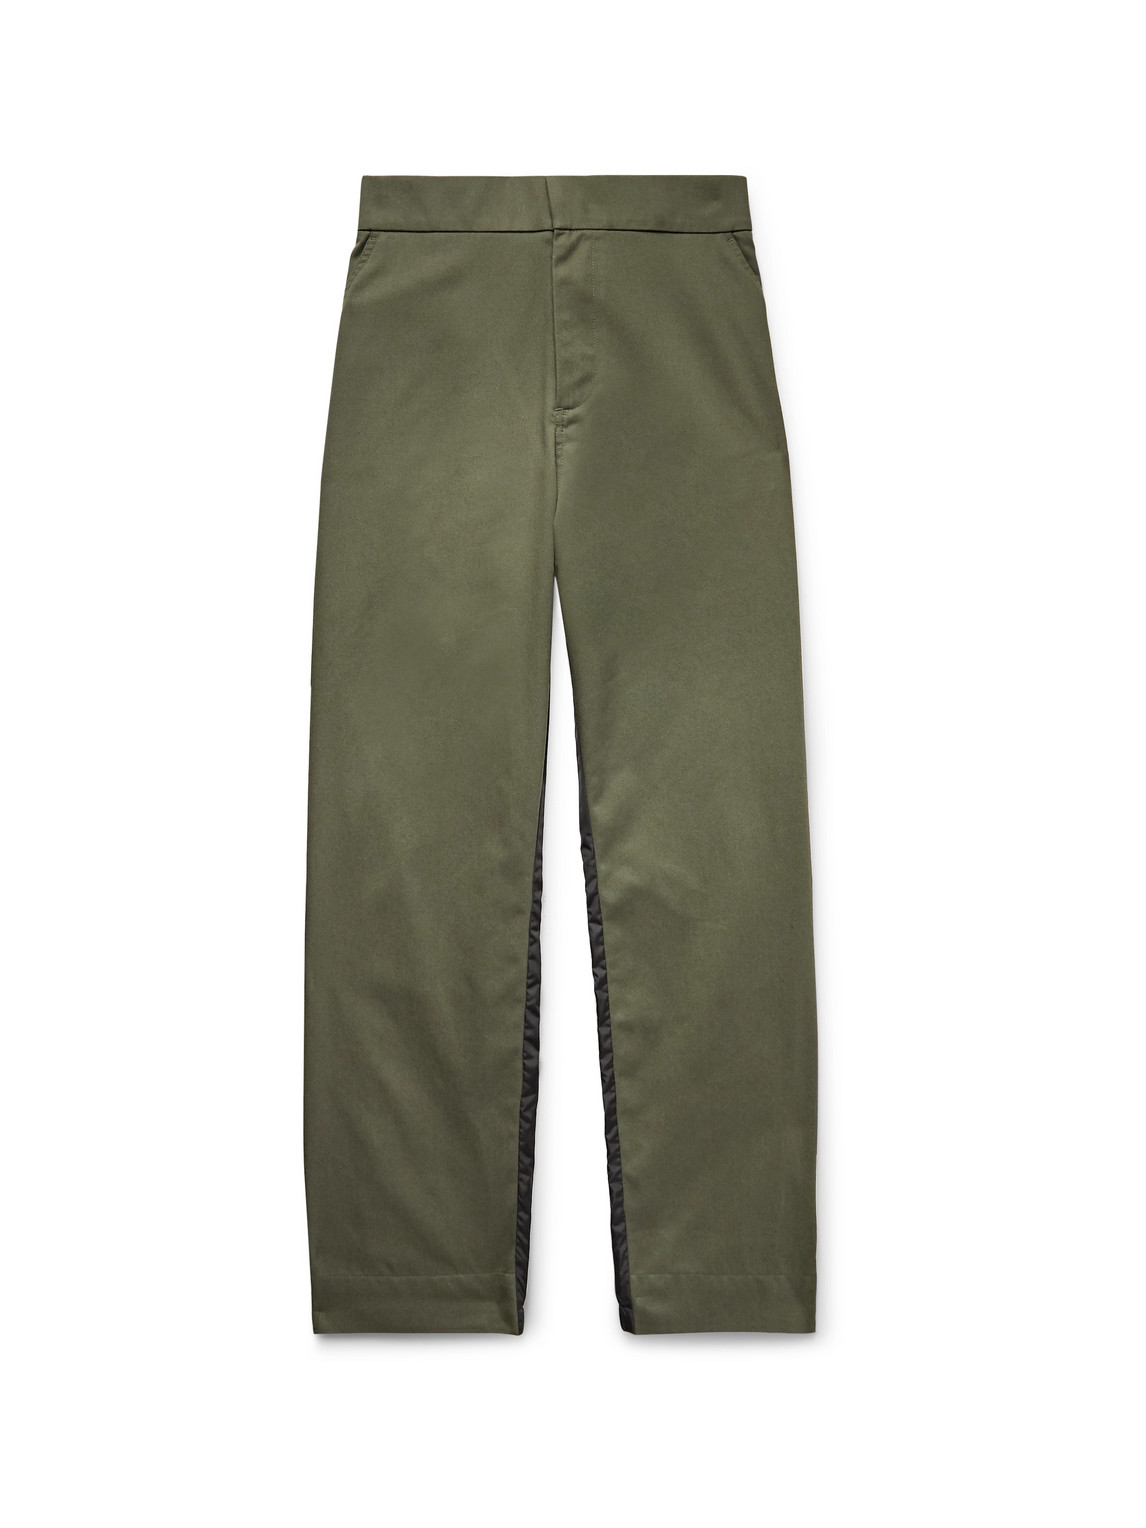 Moncler Genius 5 Moncler Craig Green Tapered Gabardine and Nylon Trousers